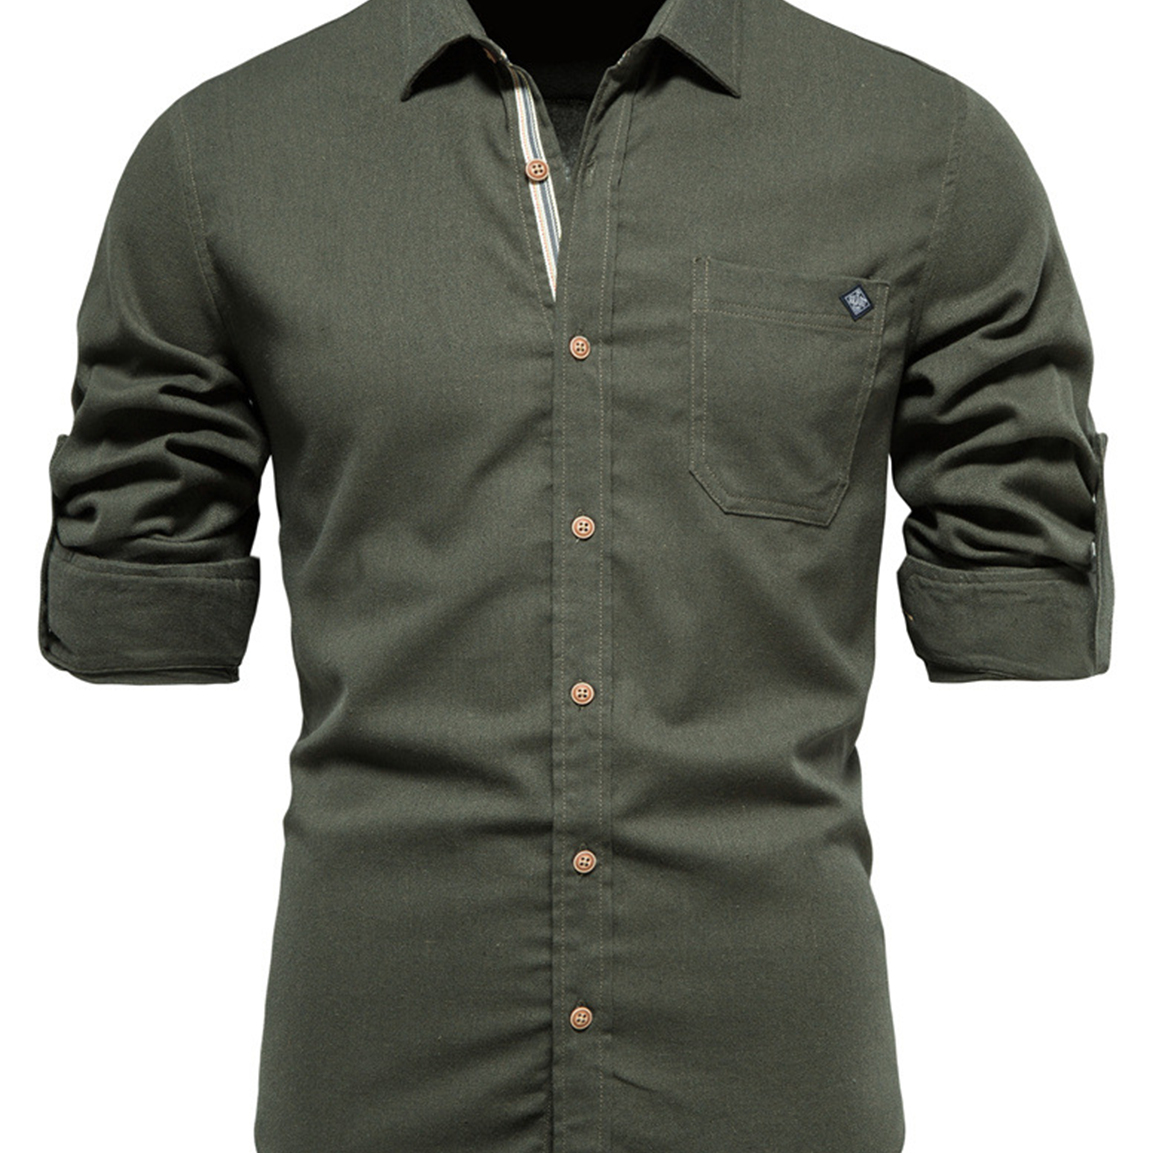 Men's Solid Color Cotton Pocket Button Up Casual Long Sleeve Shirt